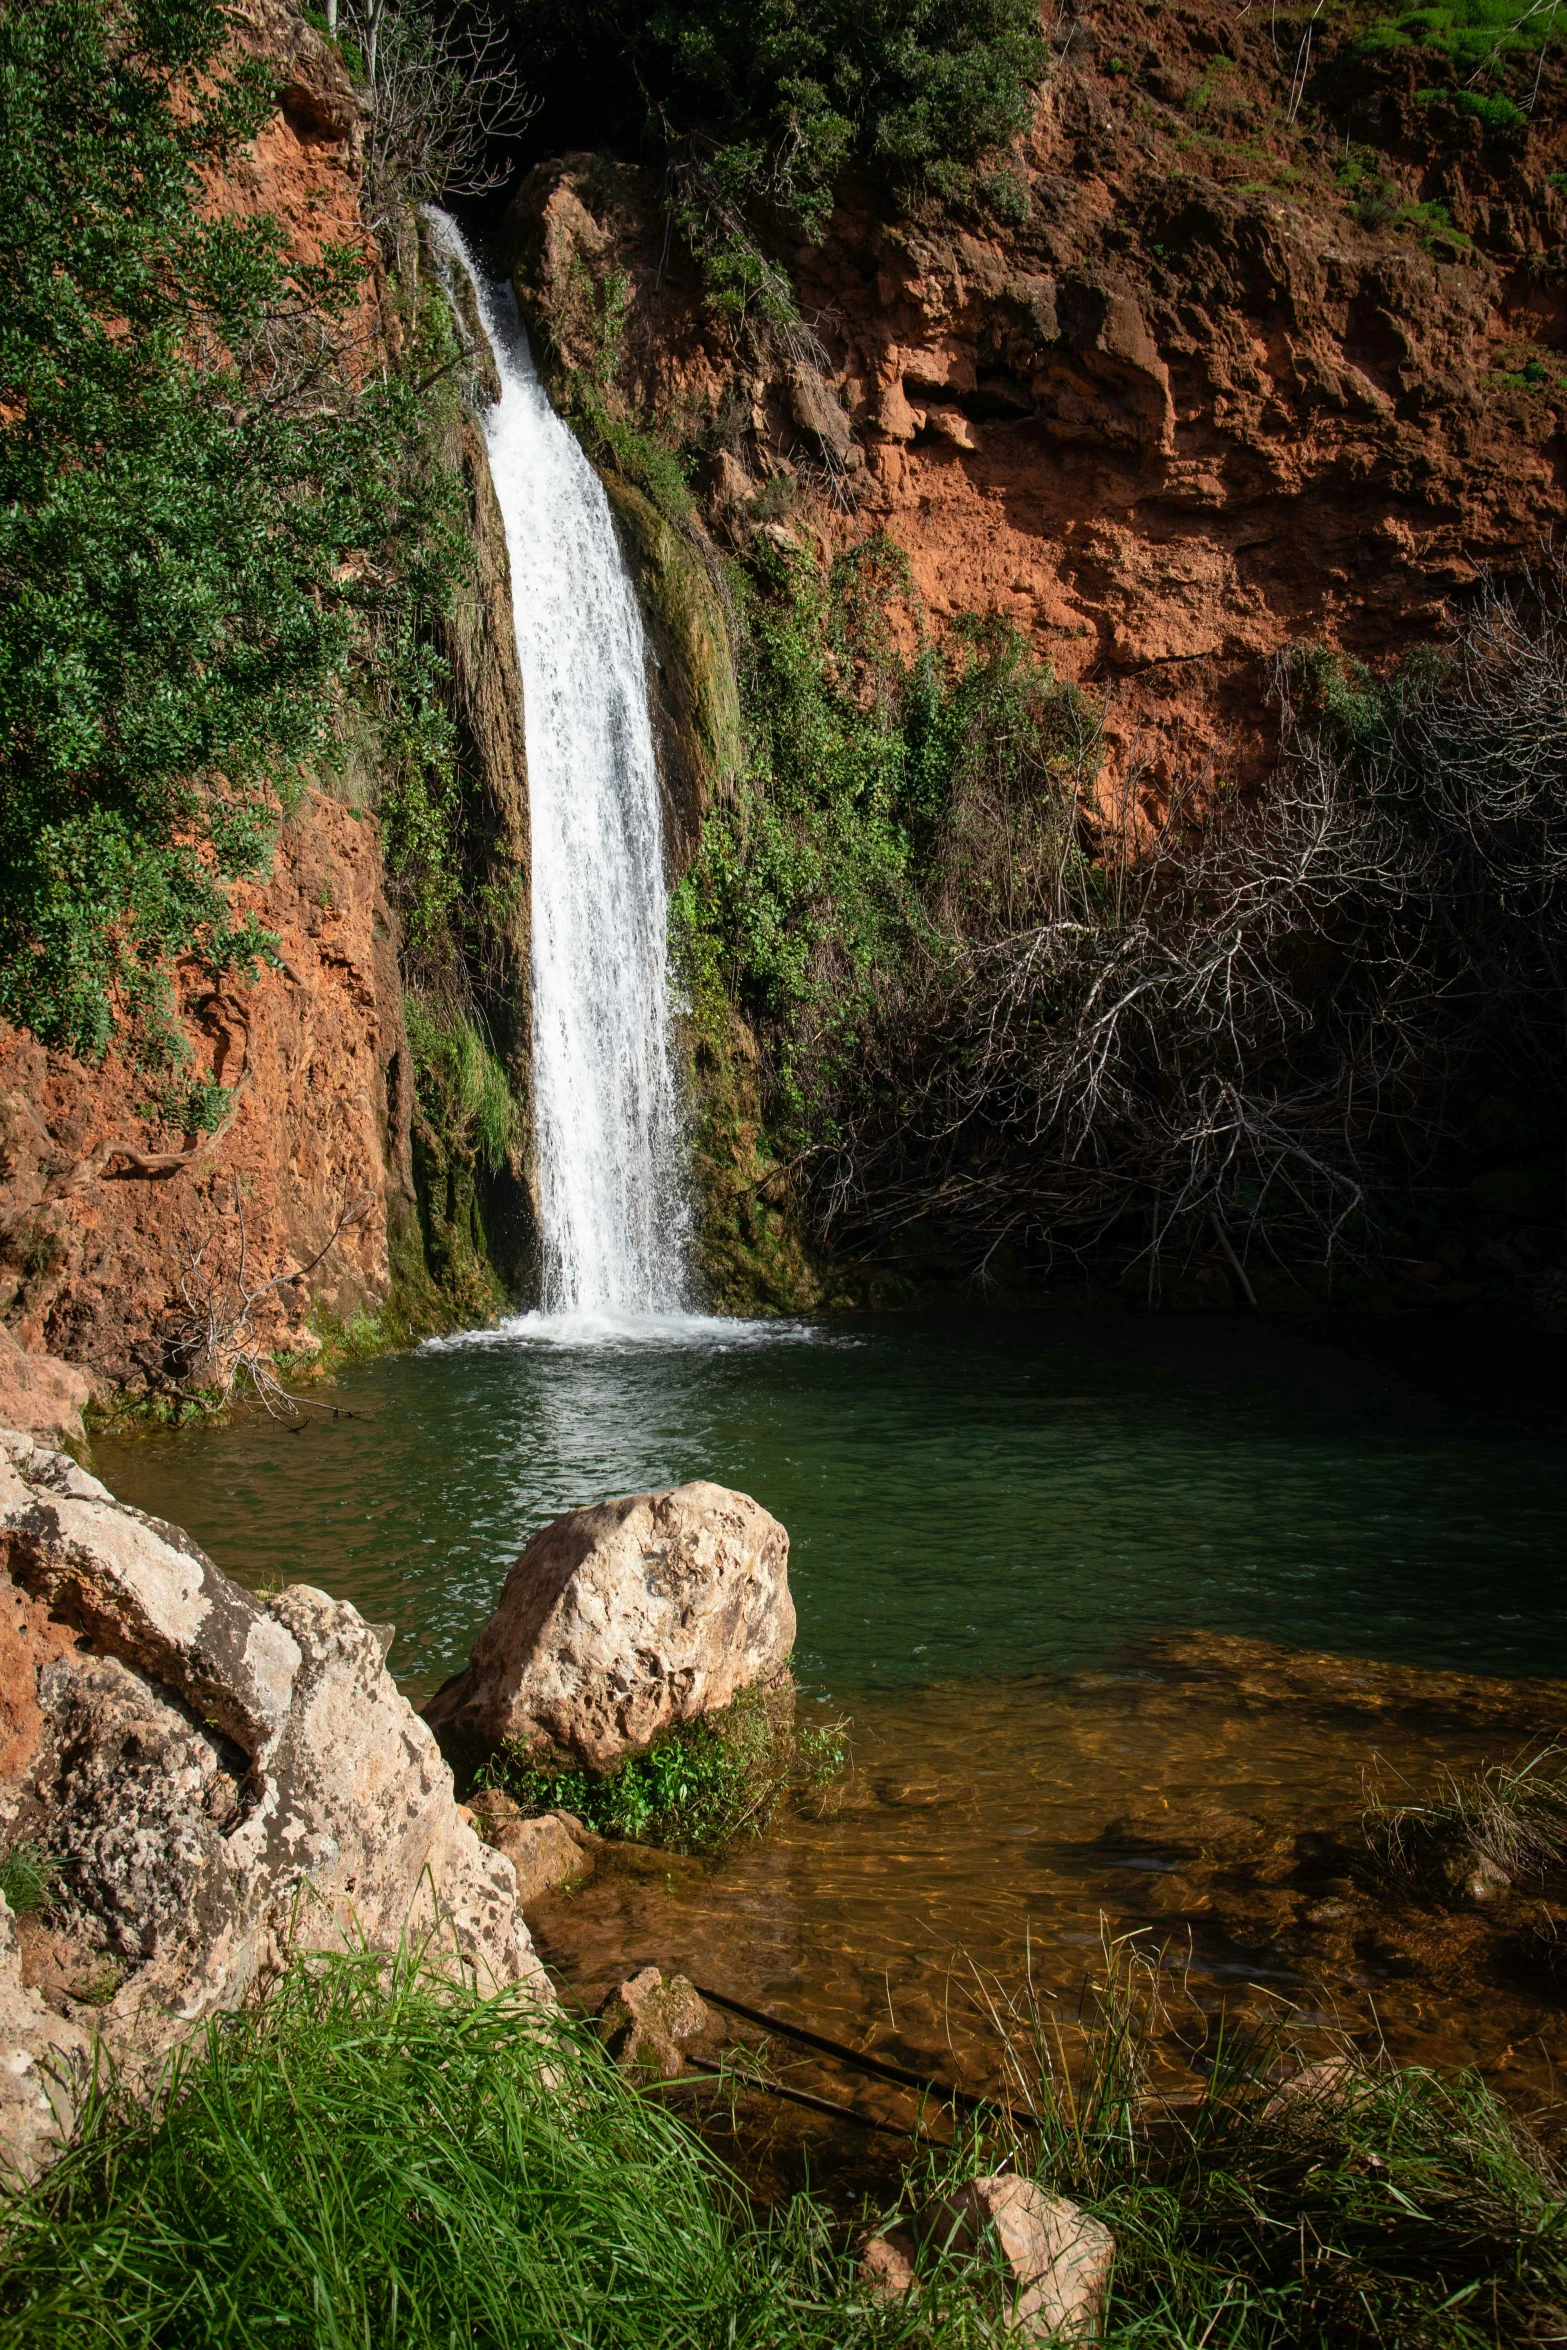 a man standing in the water beside a small waterfall